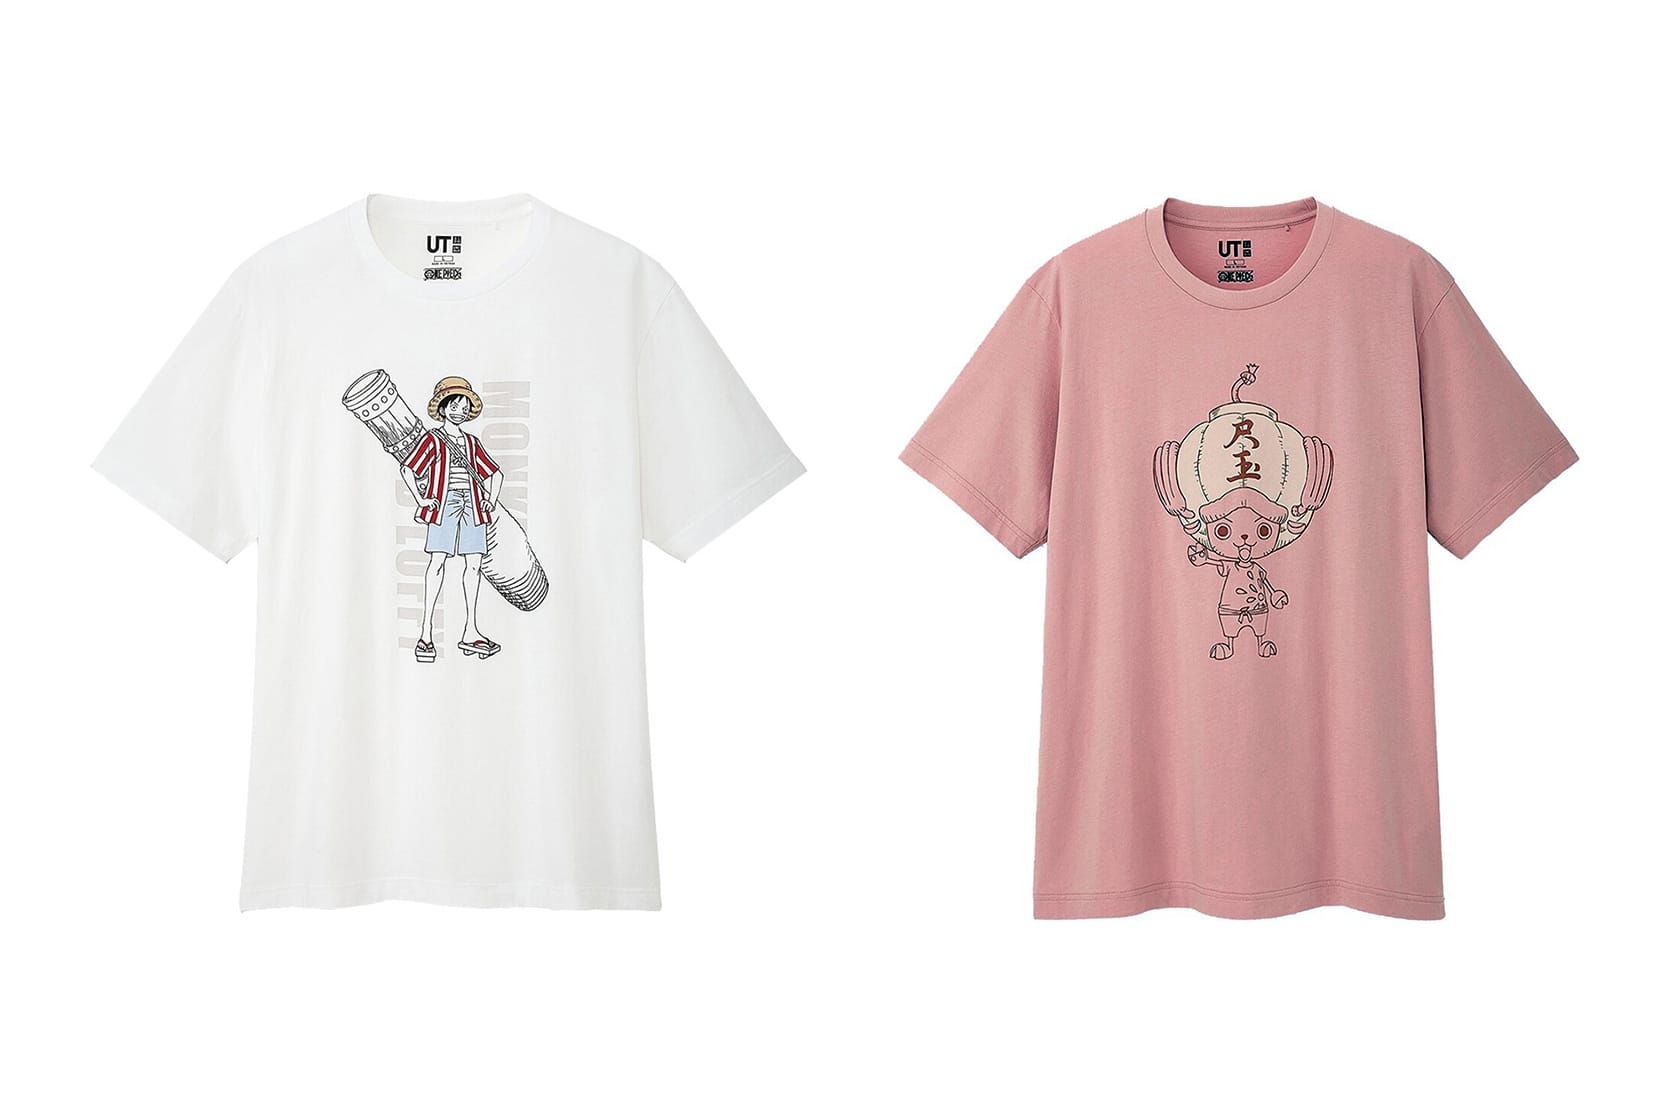 Uniqlo Releases Demon Slayer Anime Collection  License Global